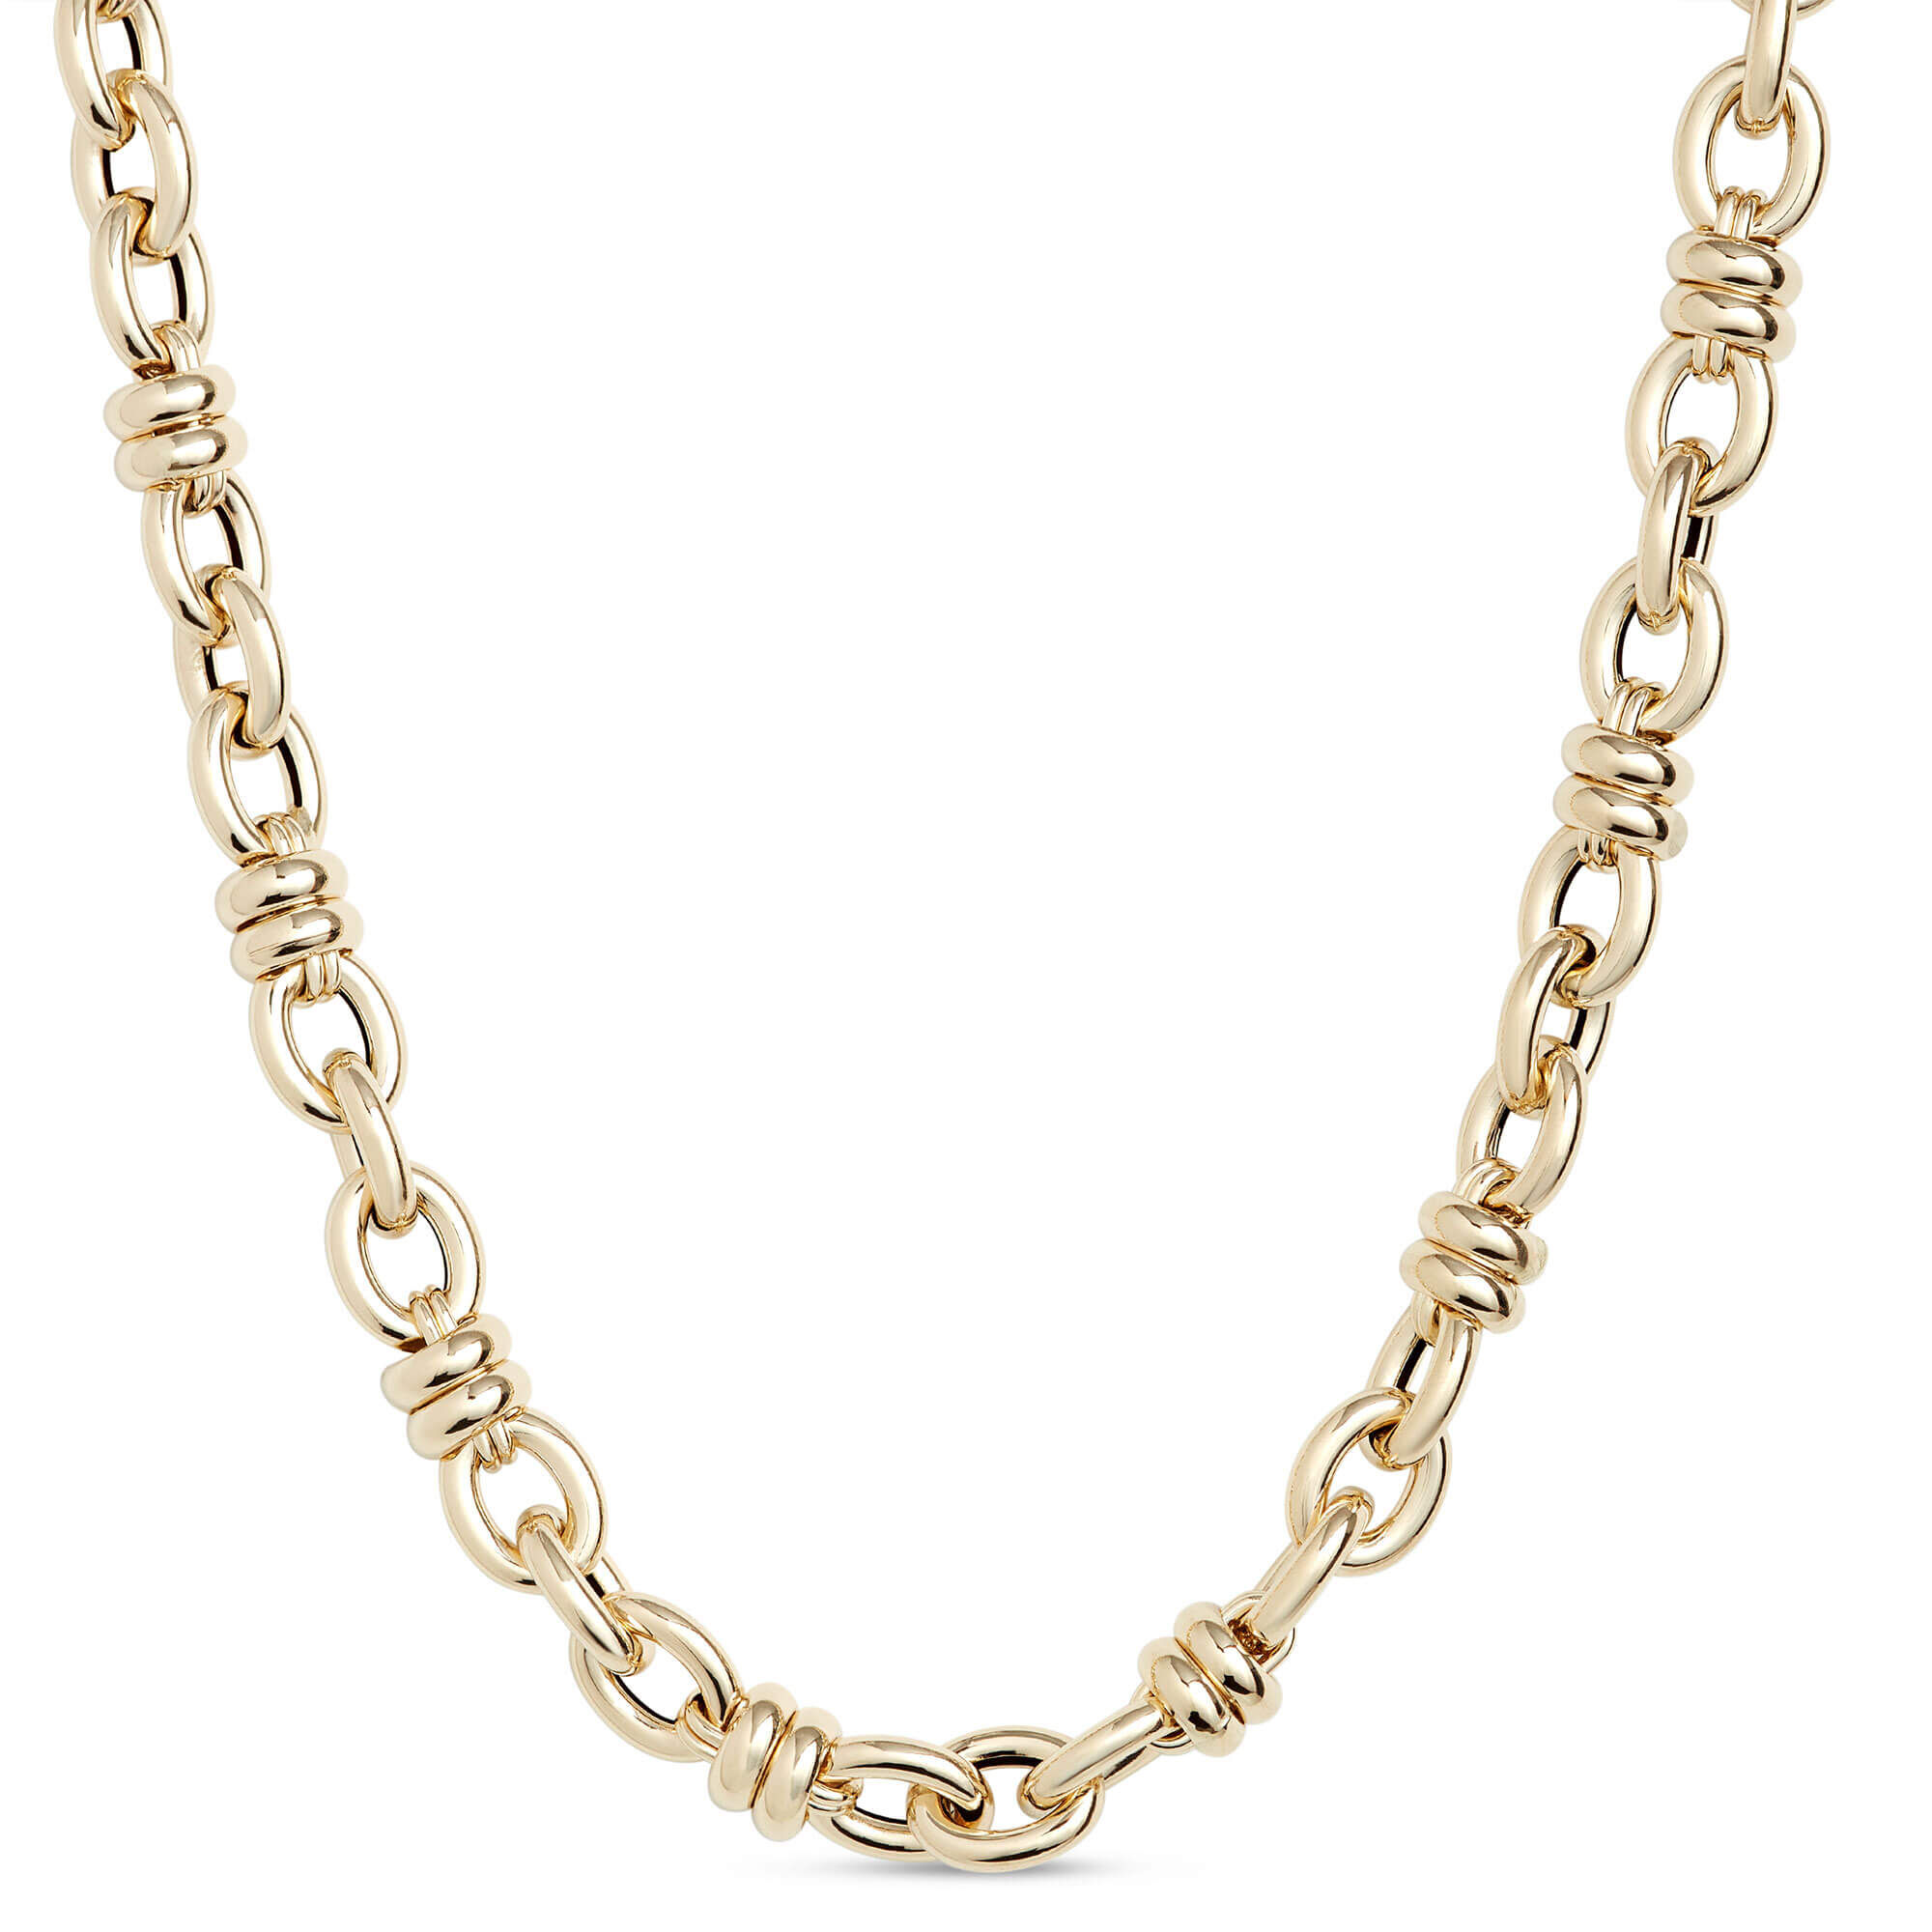 Toscano 18-Inch Chain Necklace, 14K Yellow Gold